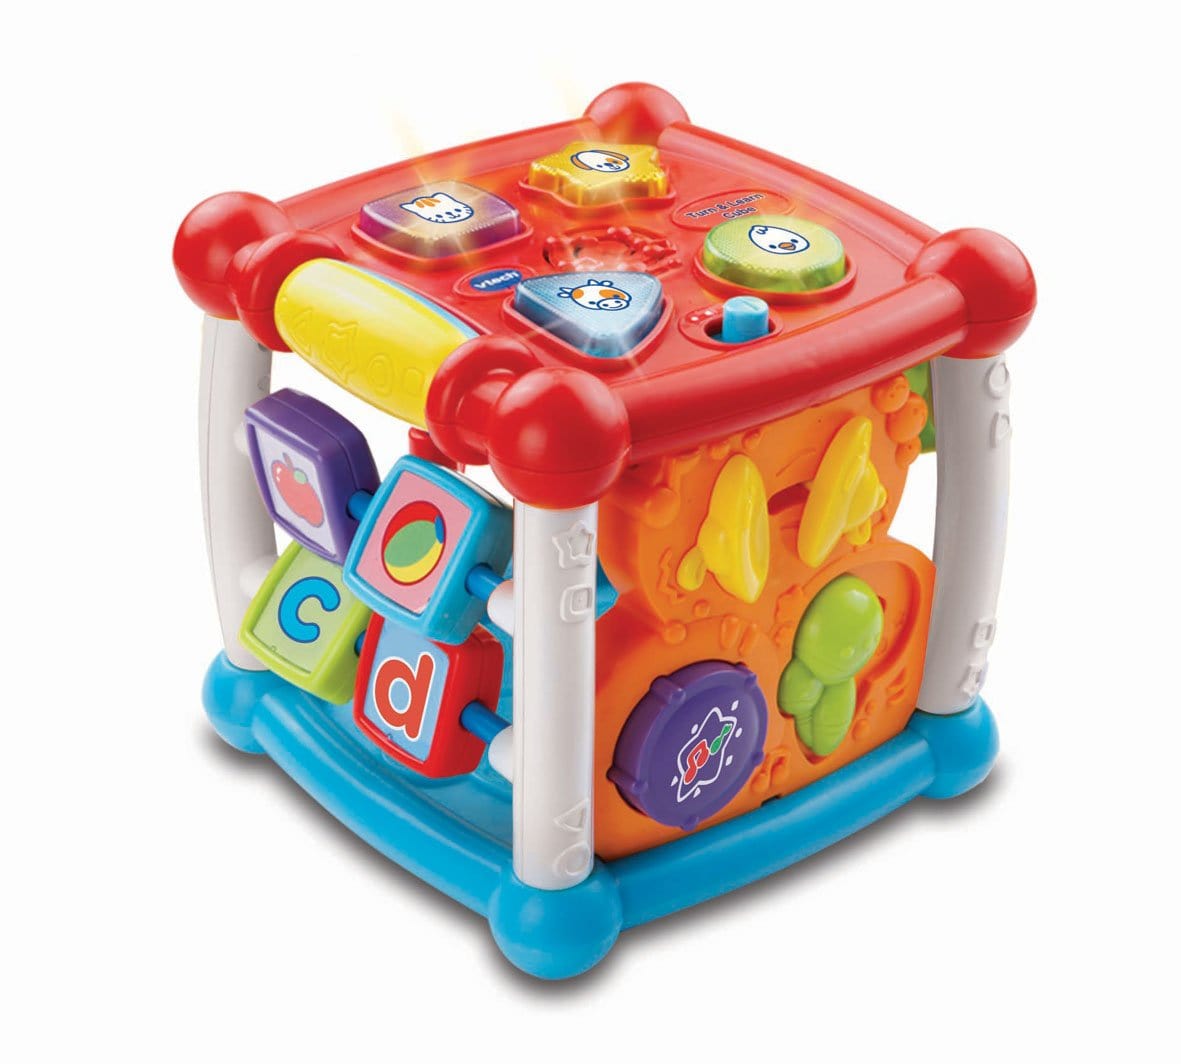 Turn & Learn Cube by VTech Hong Kong Toy